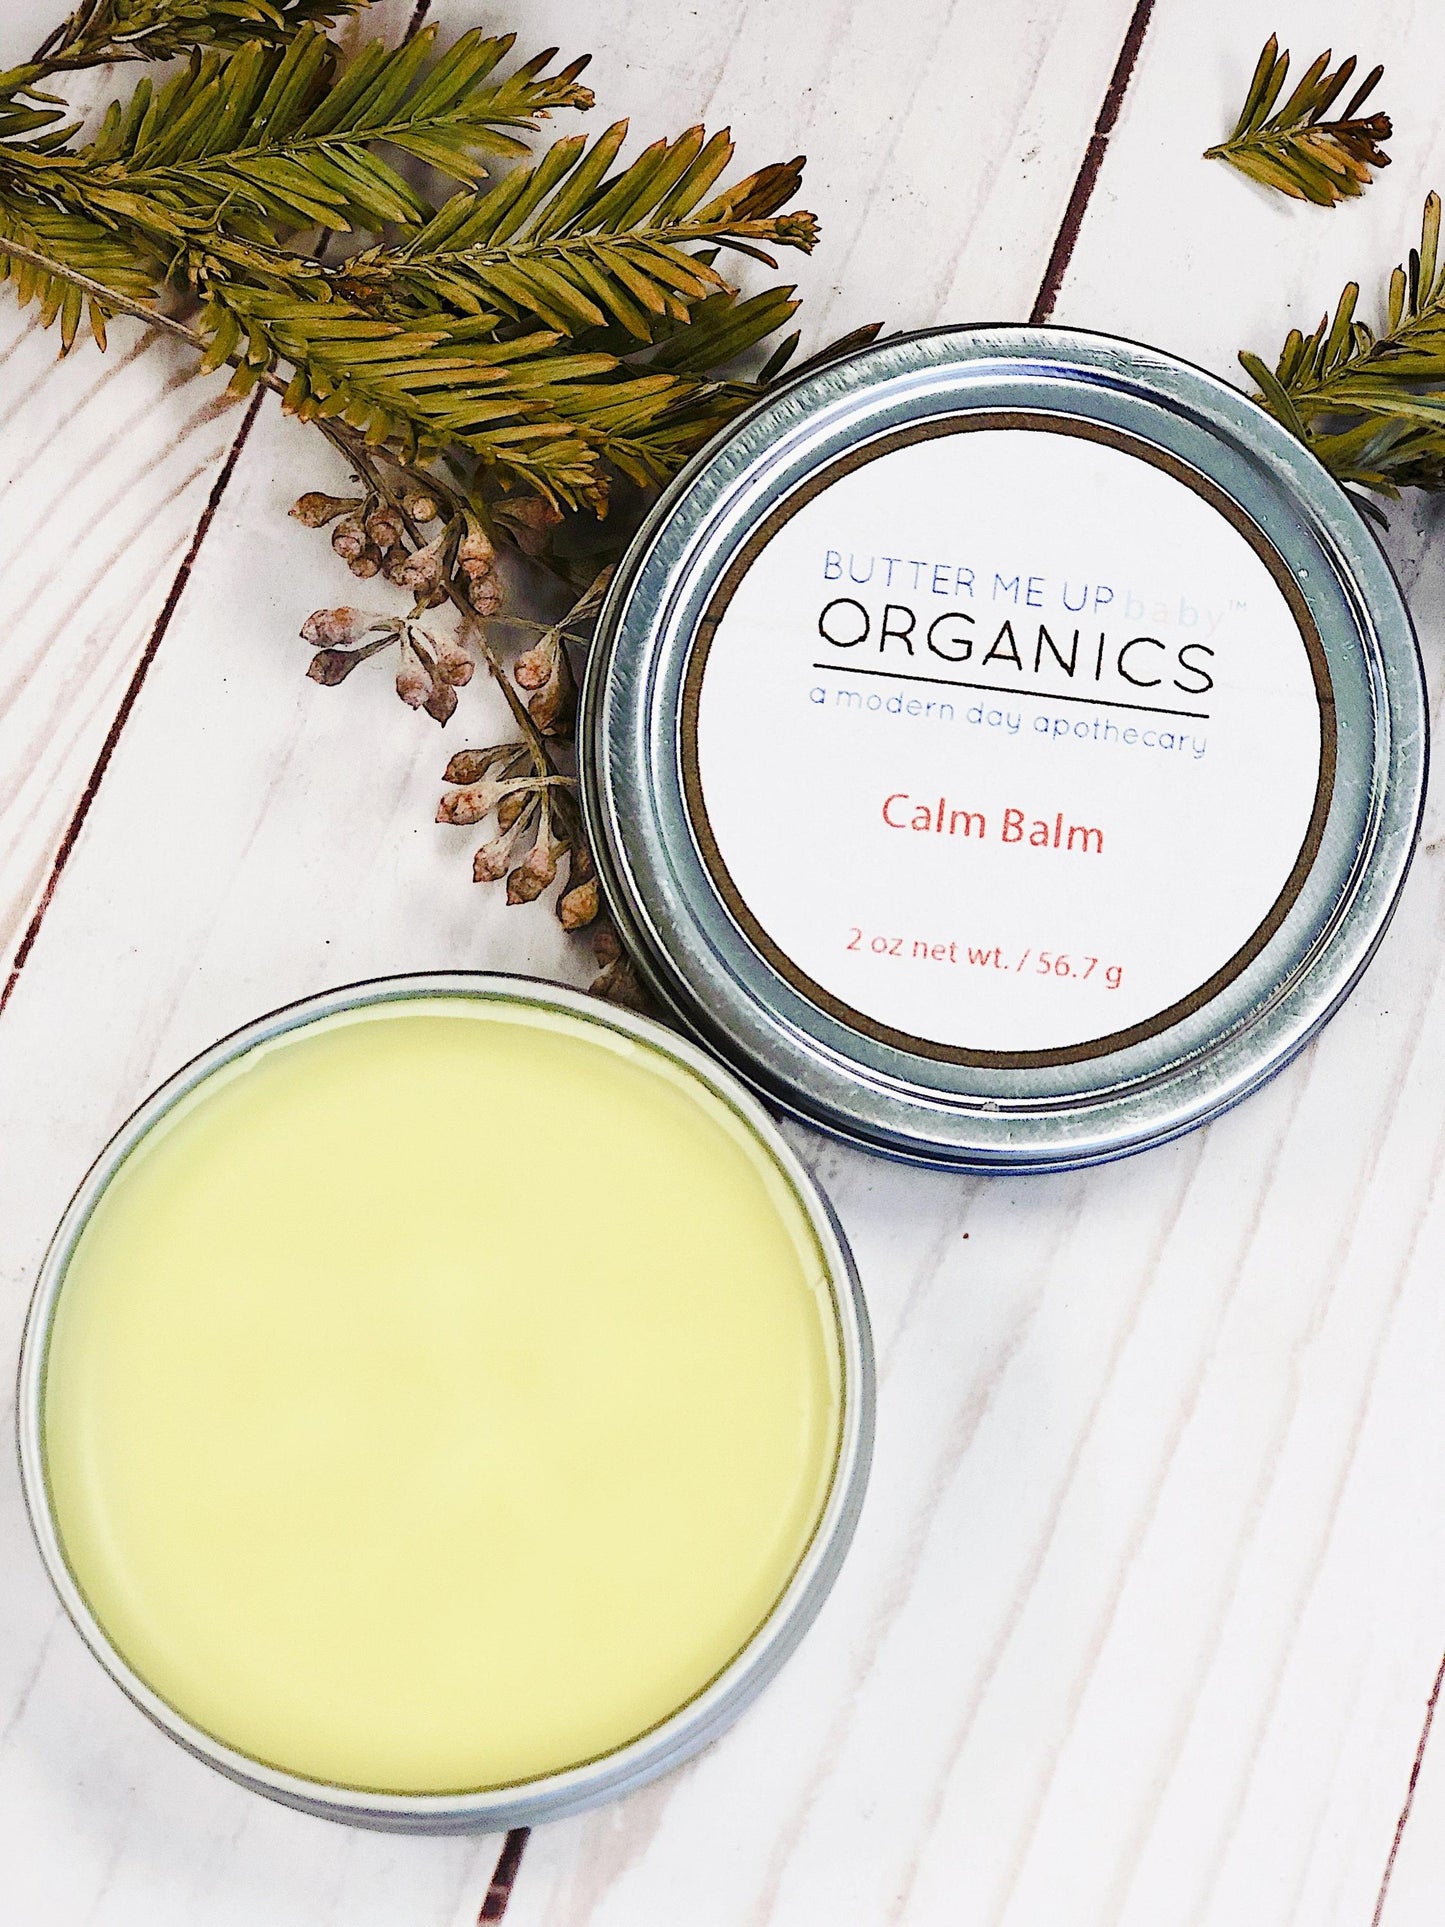 BUTTER ME UP ORGANICS Calm Balm / Aromatherapy for Babies, Children and Adults